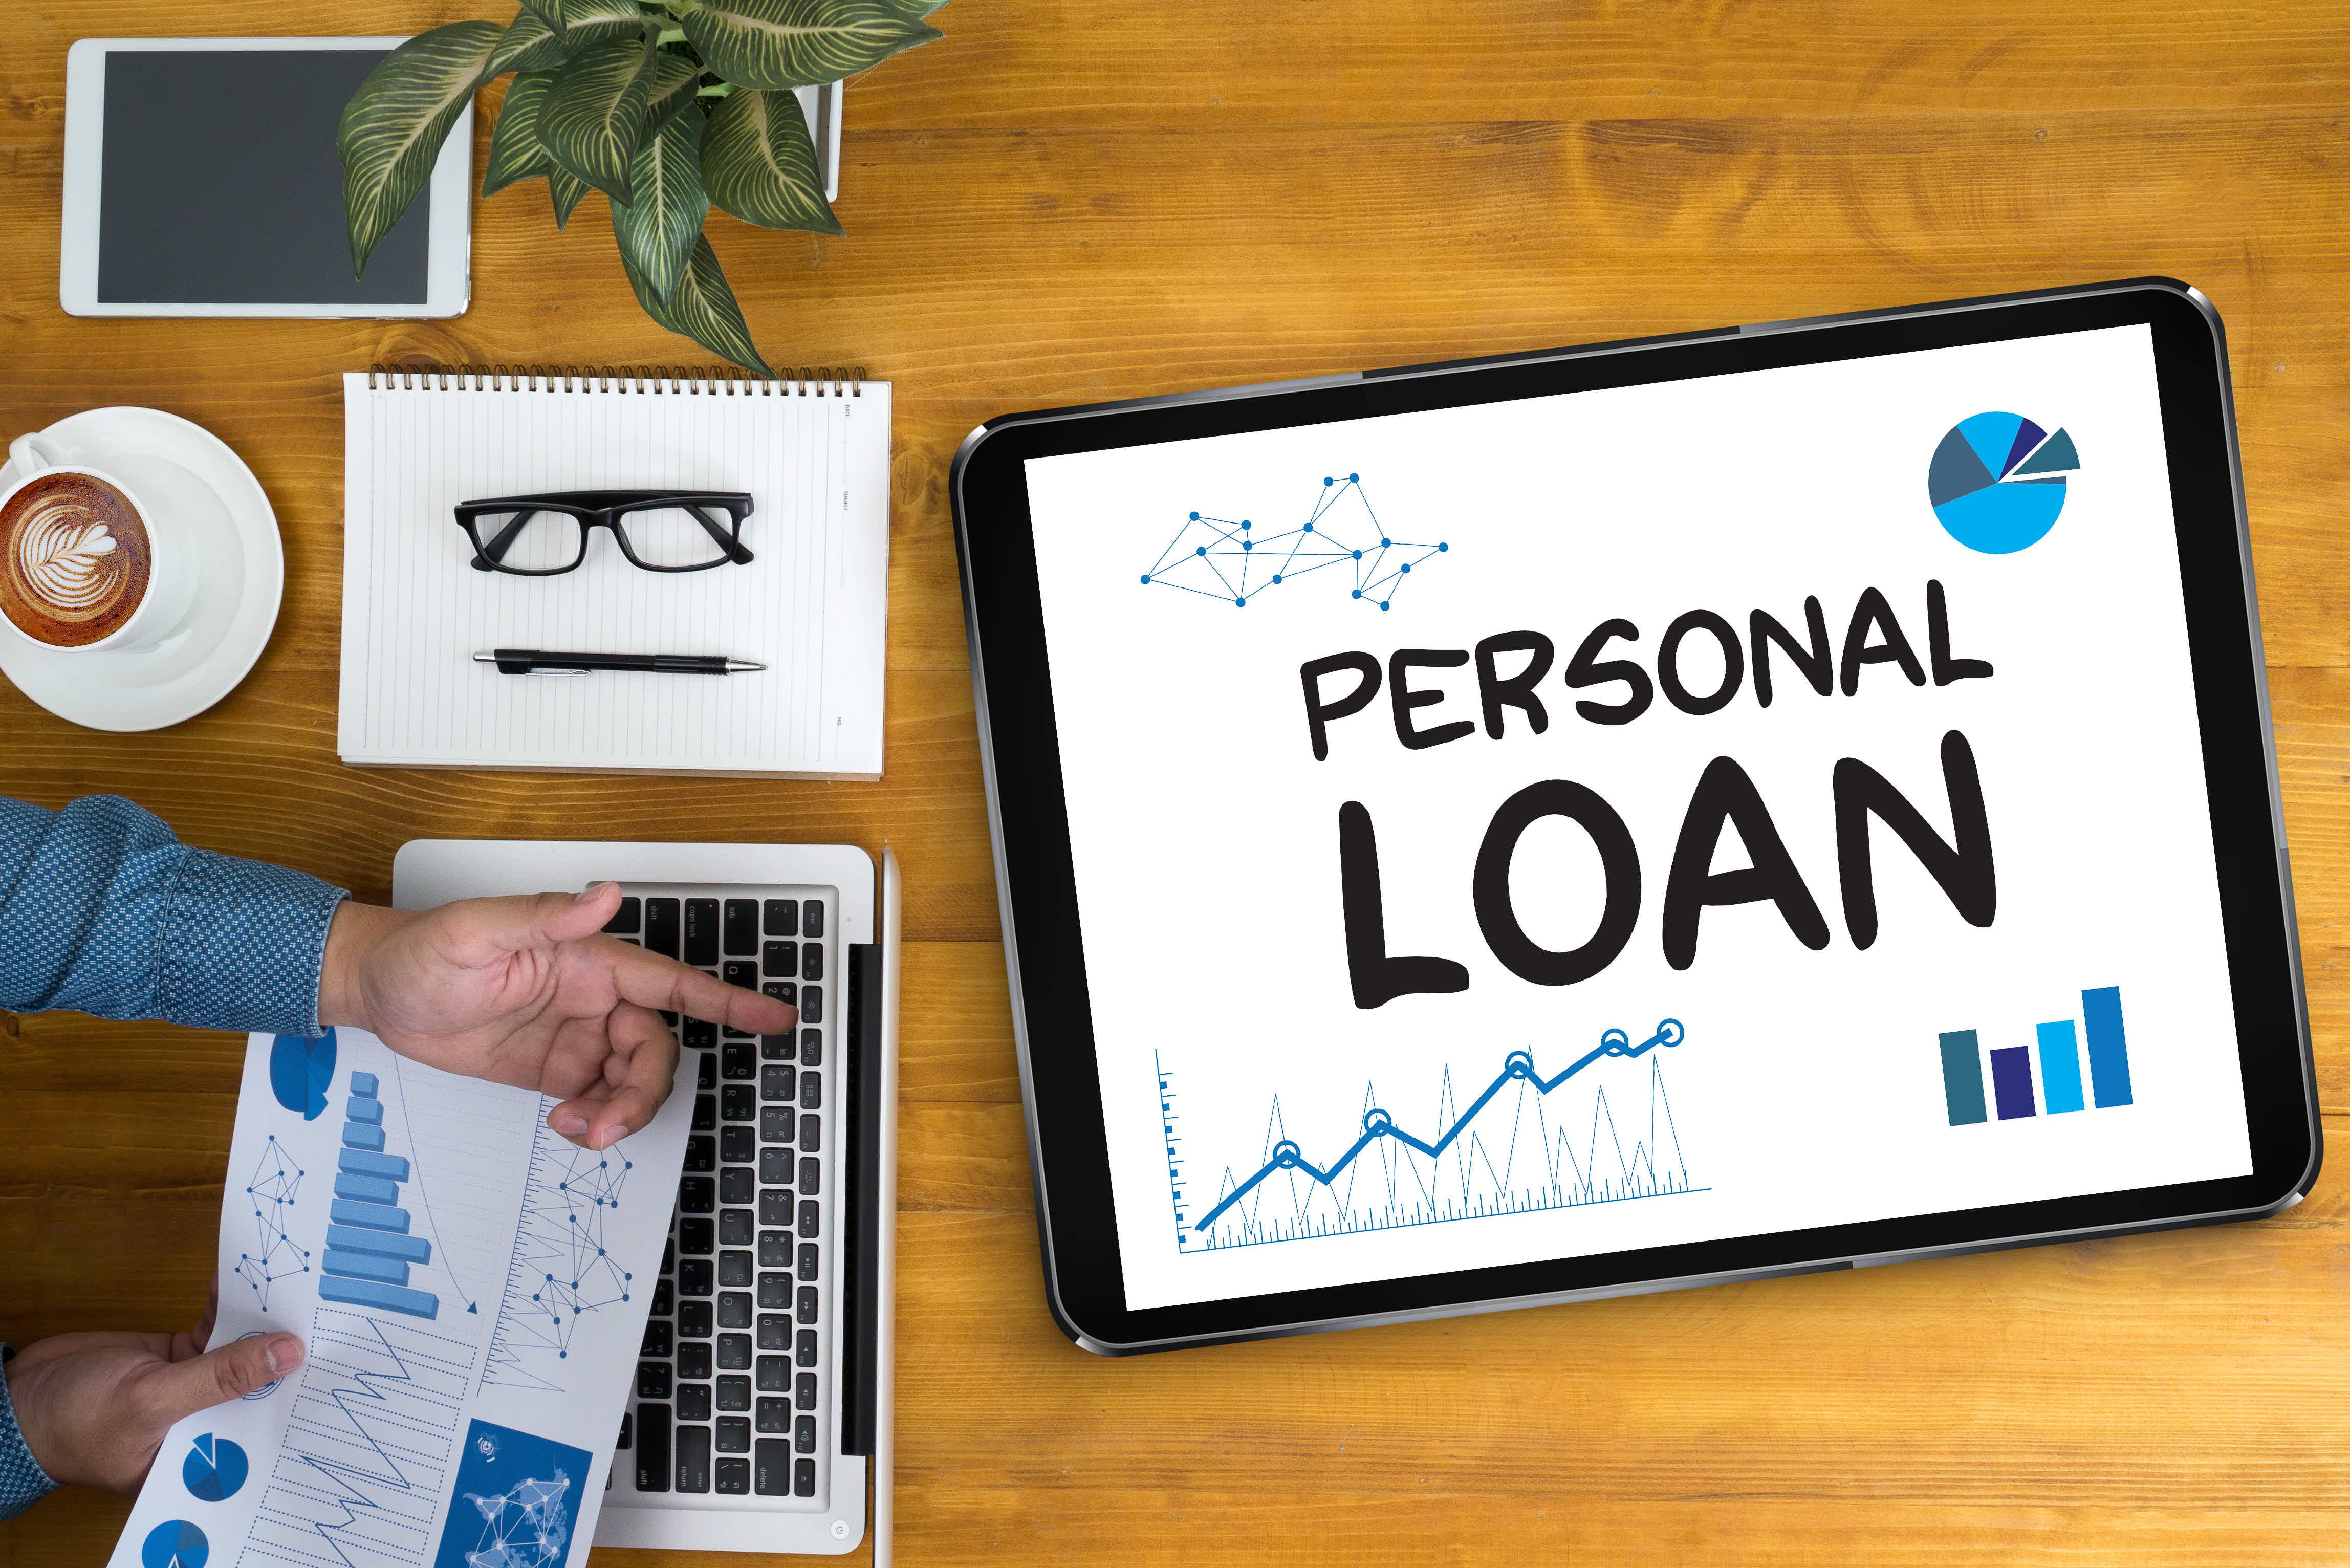 See how this personal loan works! Source: Adobe Stock